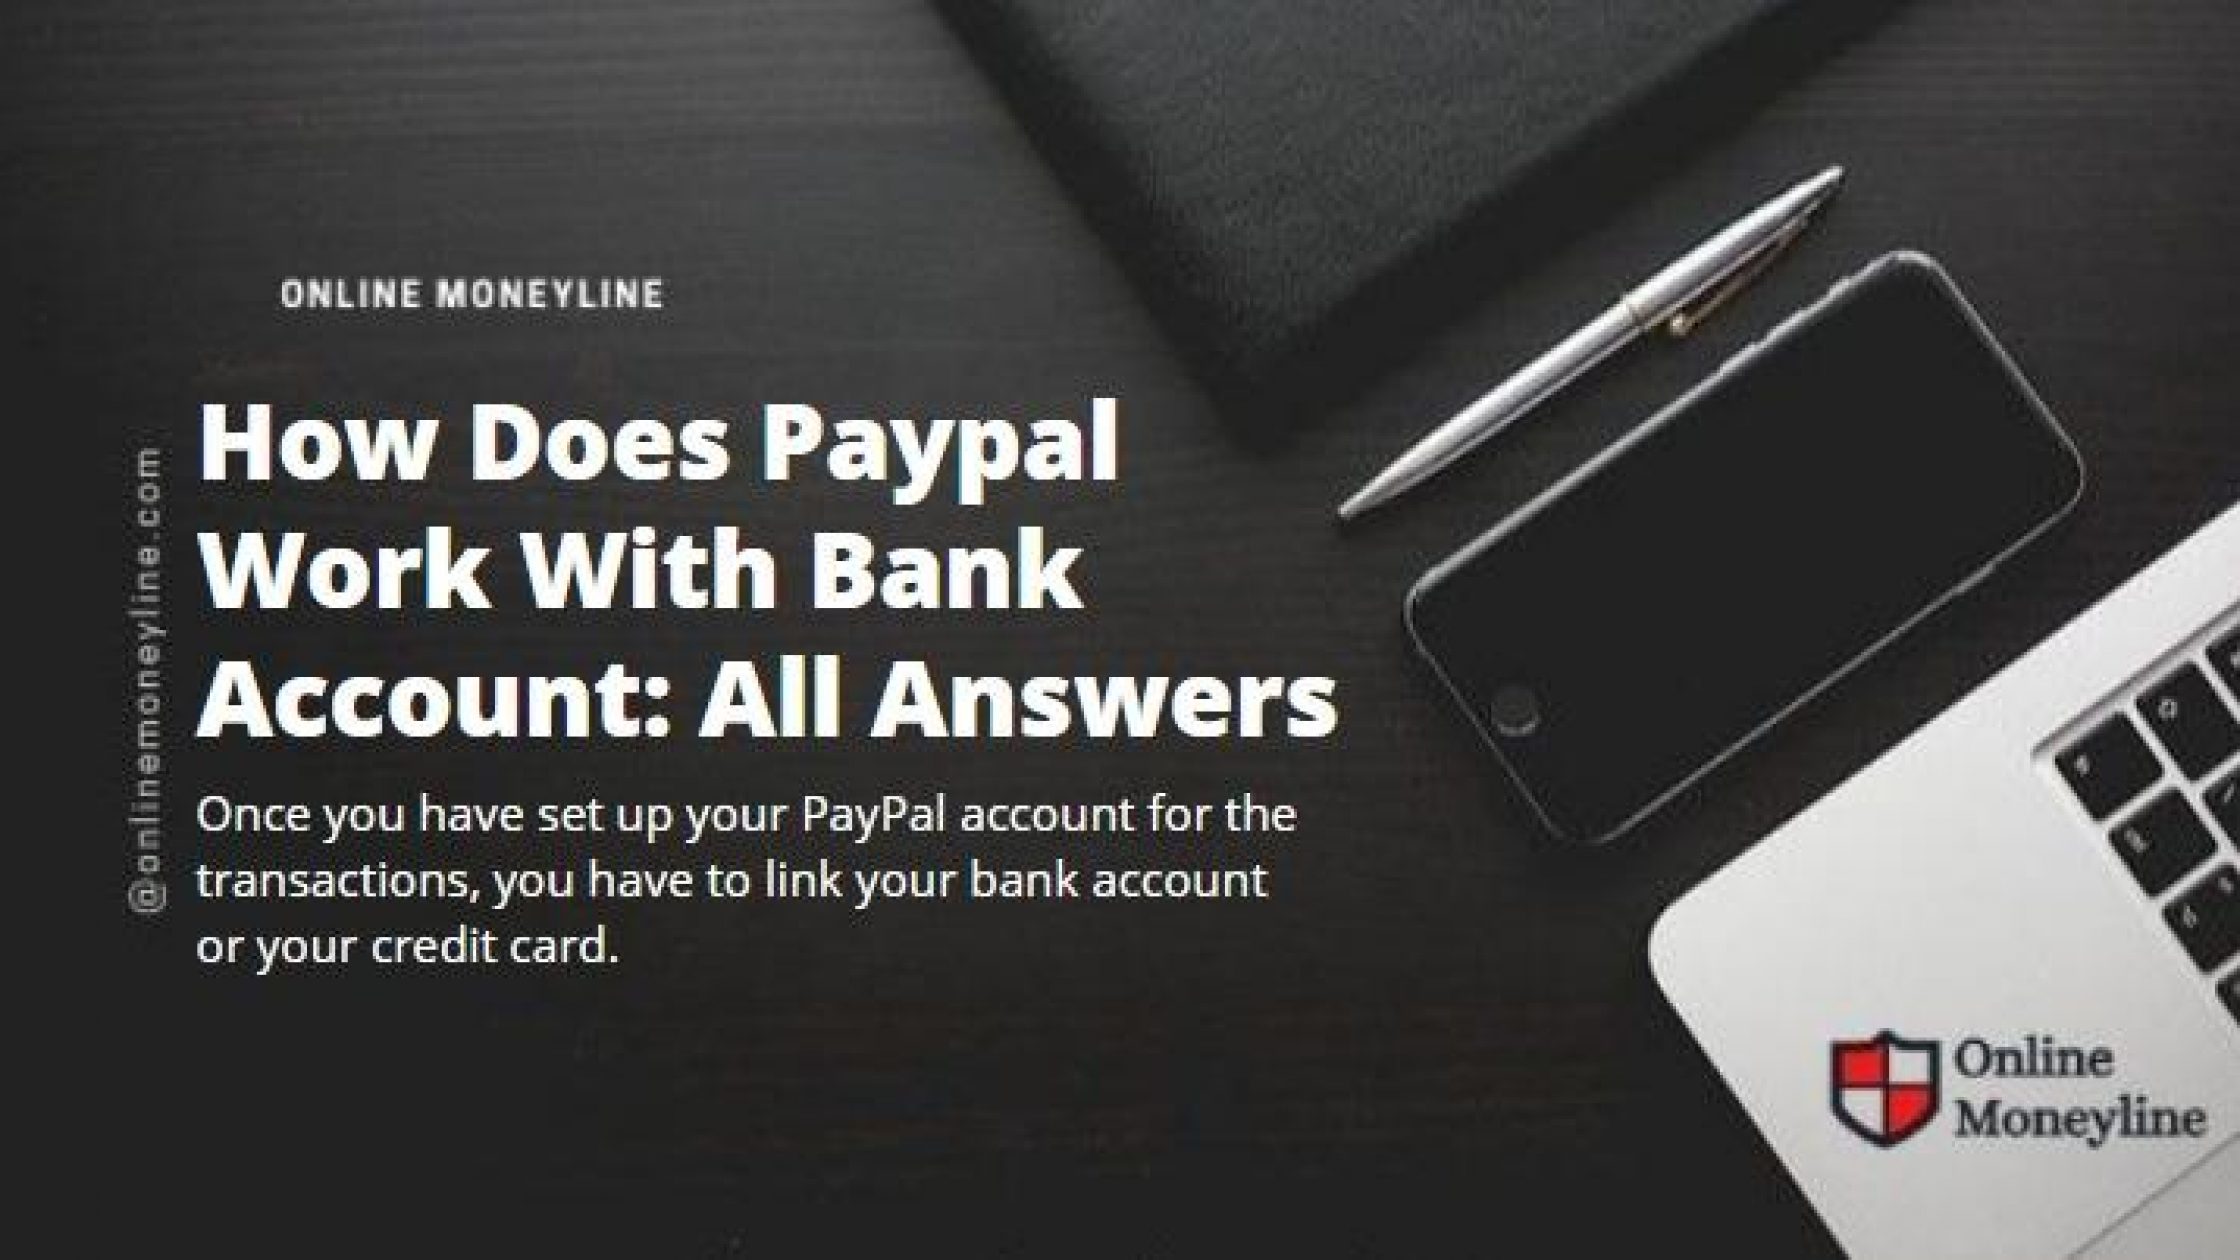 How Does Paypal Work With Bank Account: All Answers